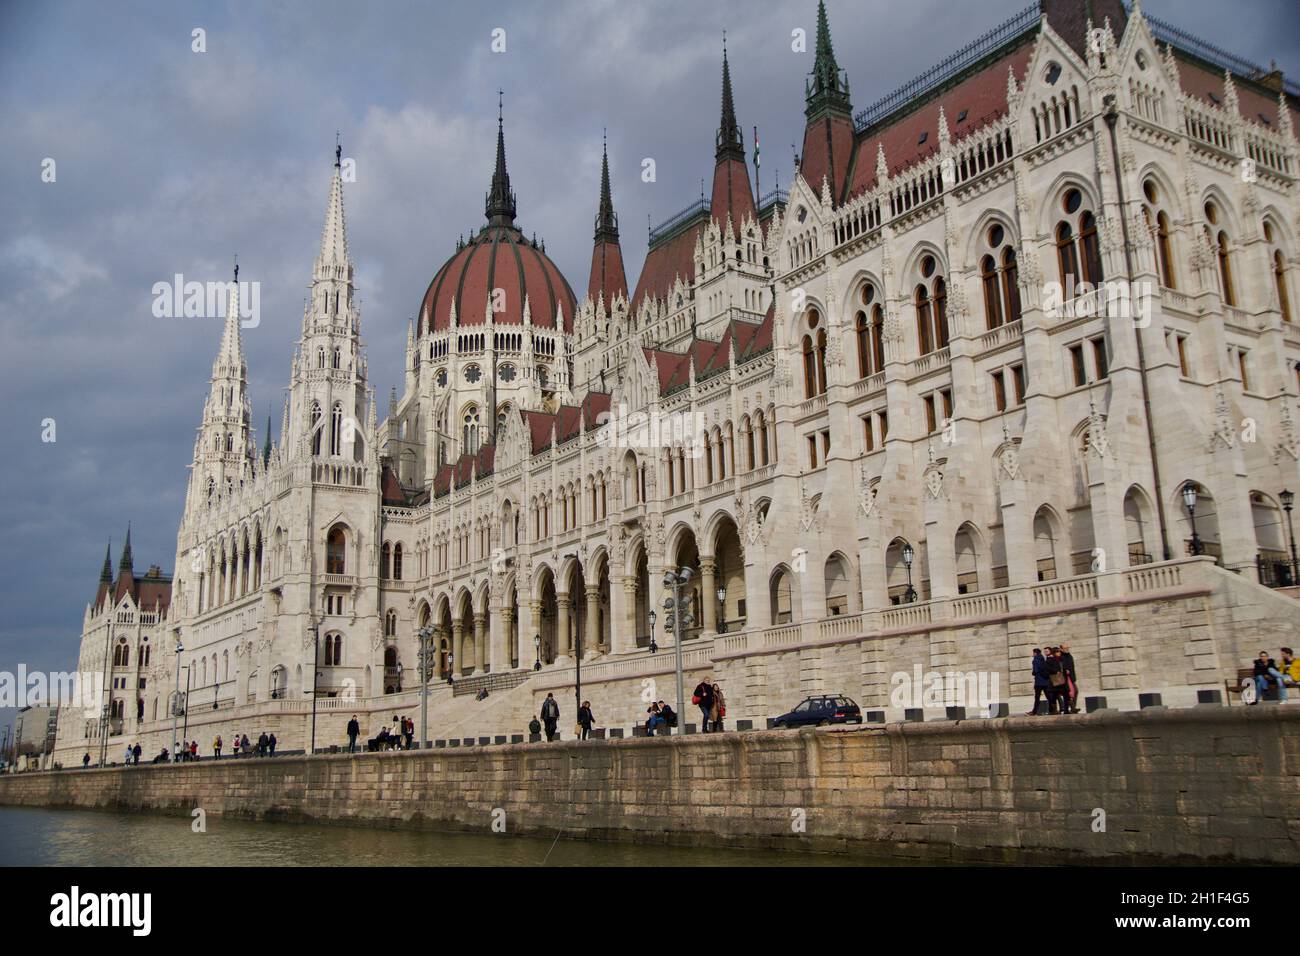 BUDAPEST, HUNGARY - 03 MAR 2019: Exterior view of the Parliament building of Hungary on the Danube. The Hungarian Parliament, richly decorated inside Stock Photo